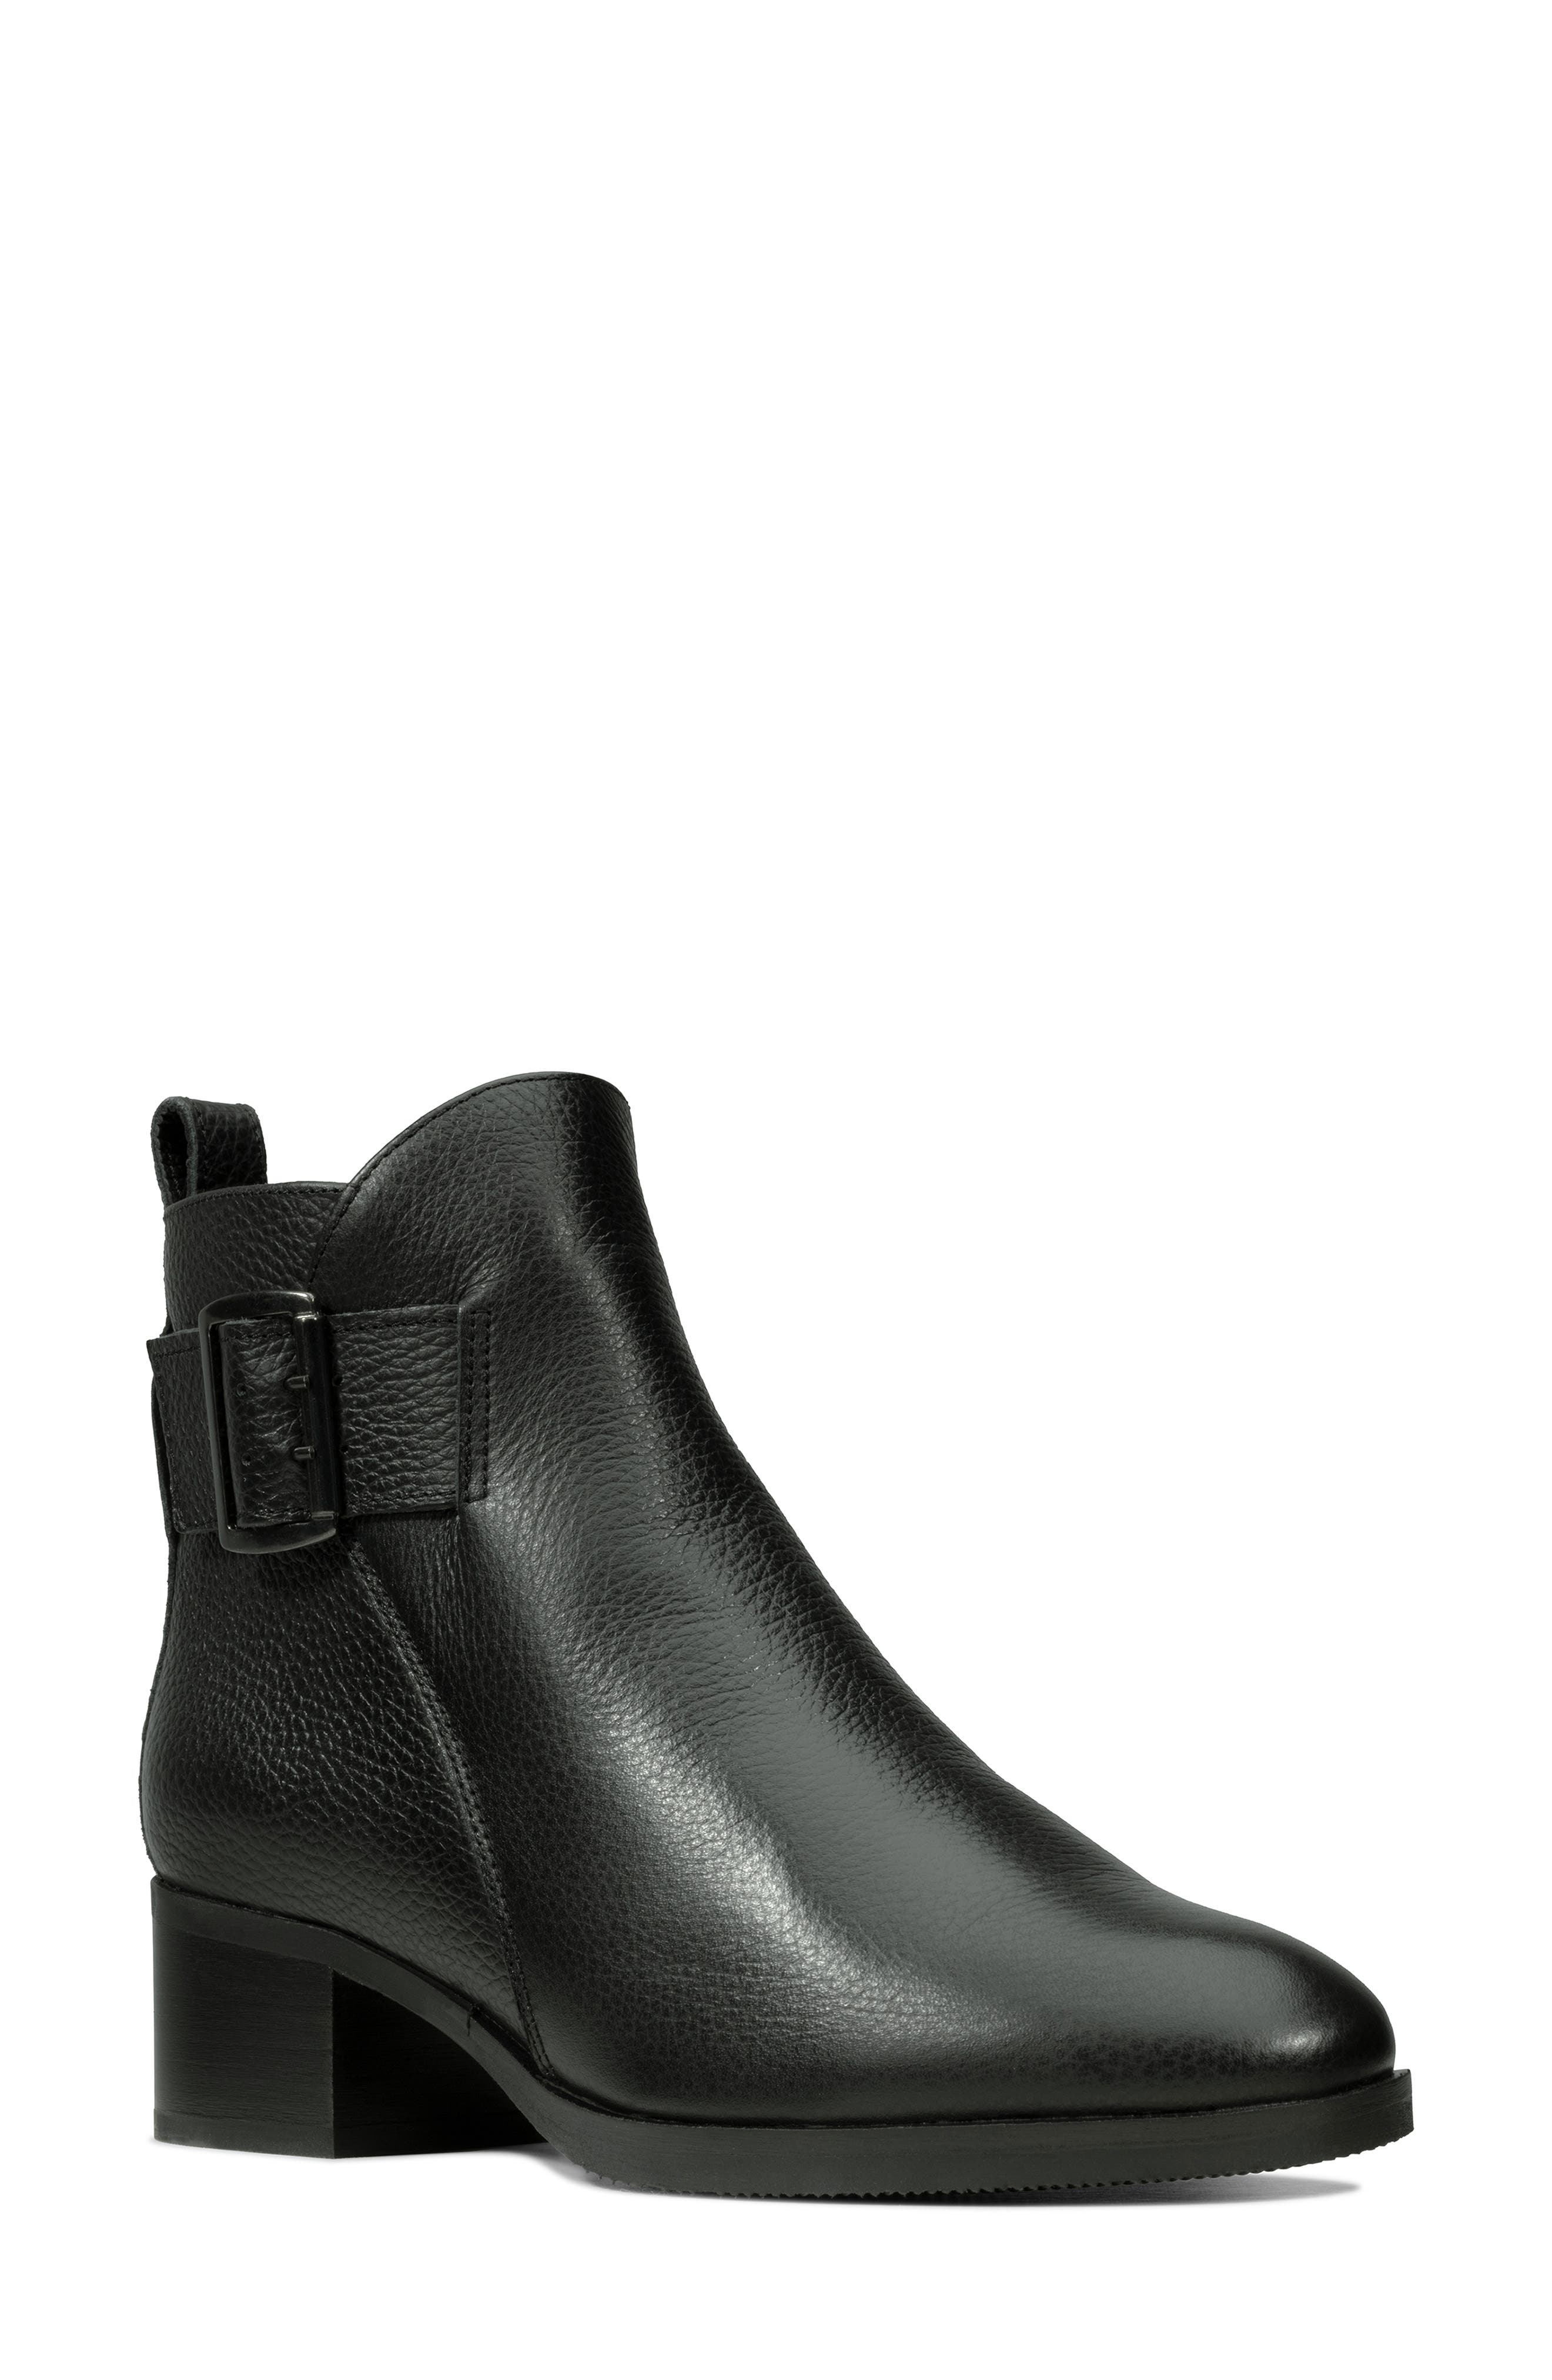 clarks square toe boots